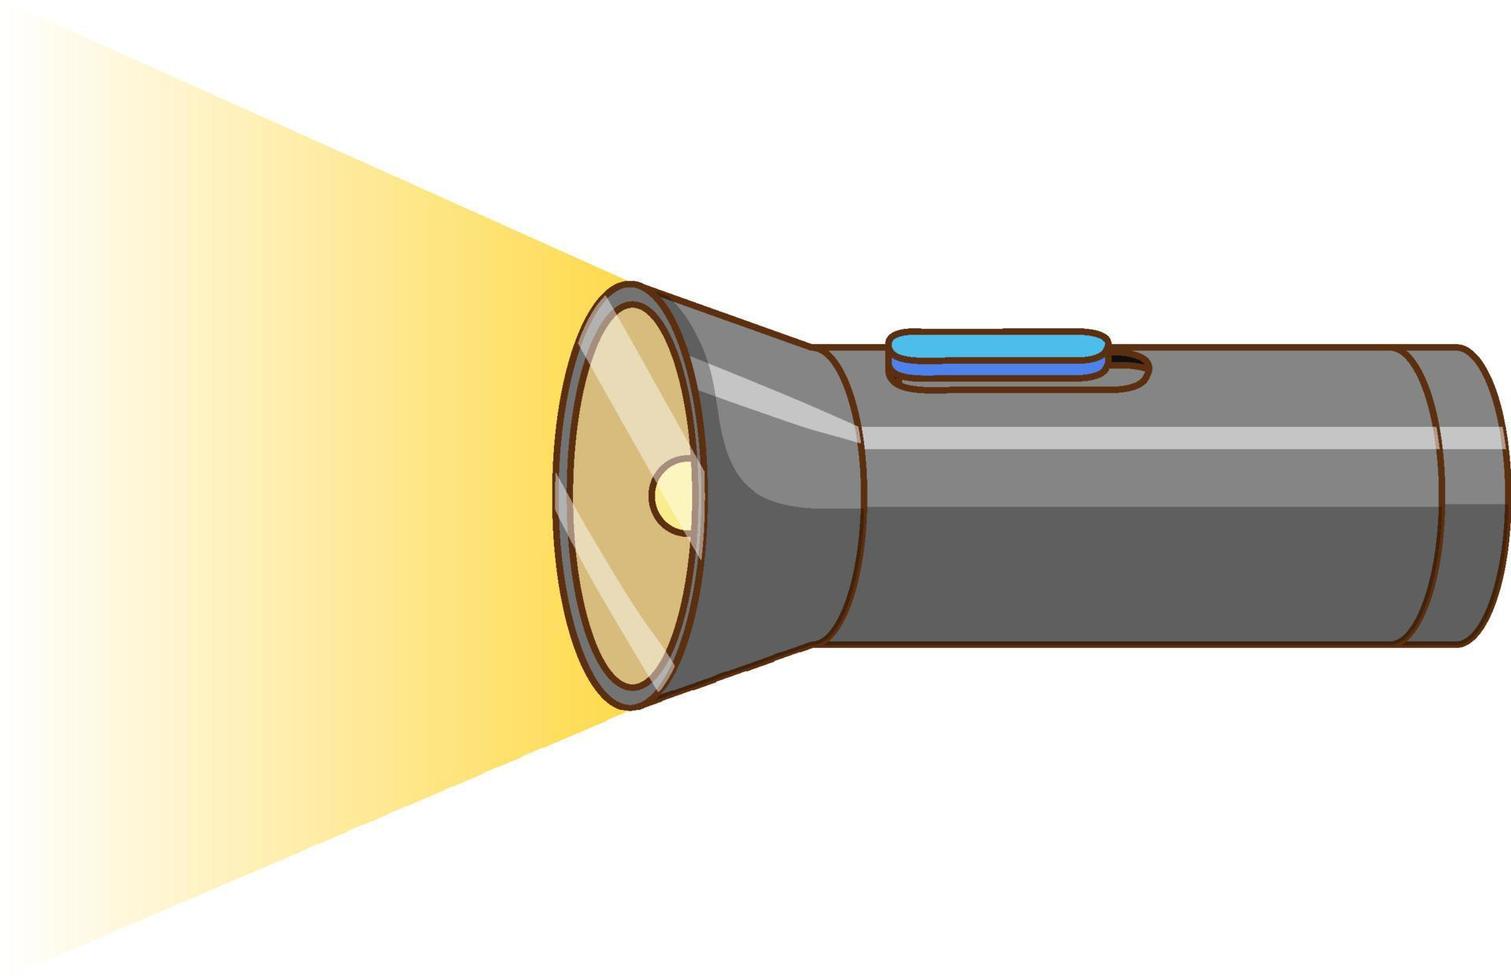 Torch or flashlight on white background vector